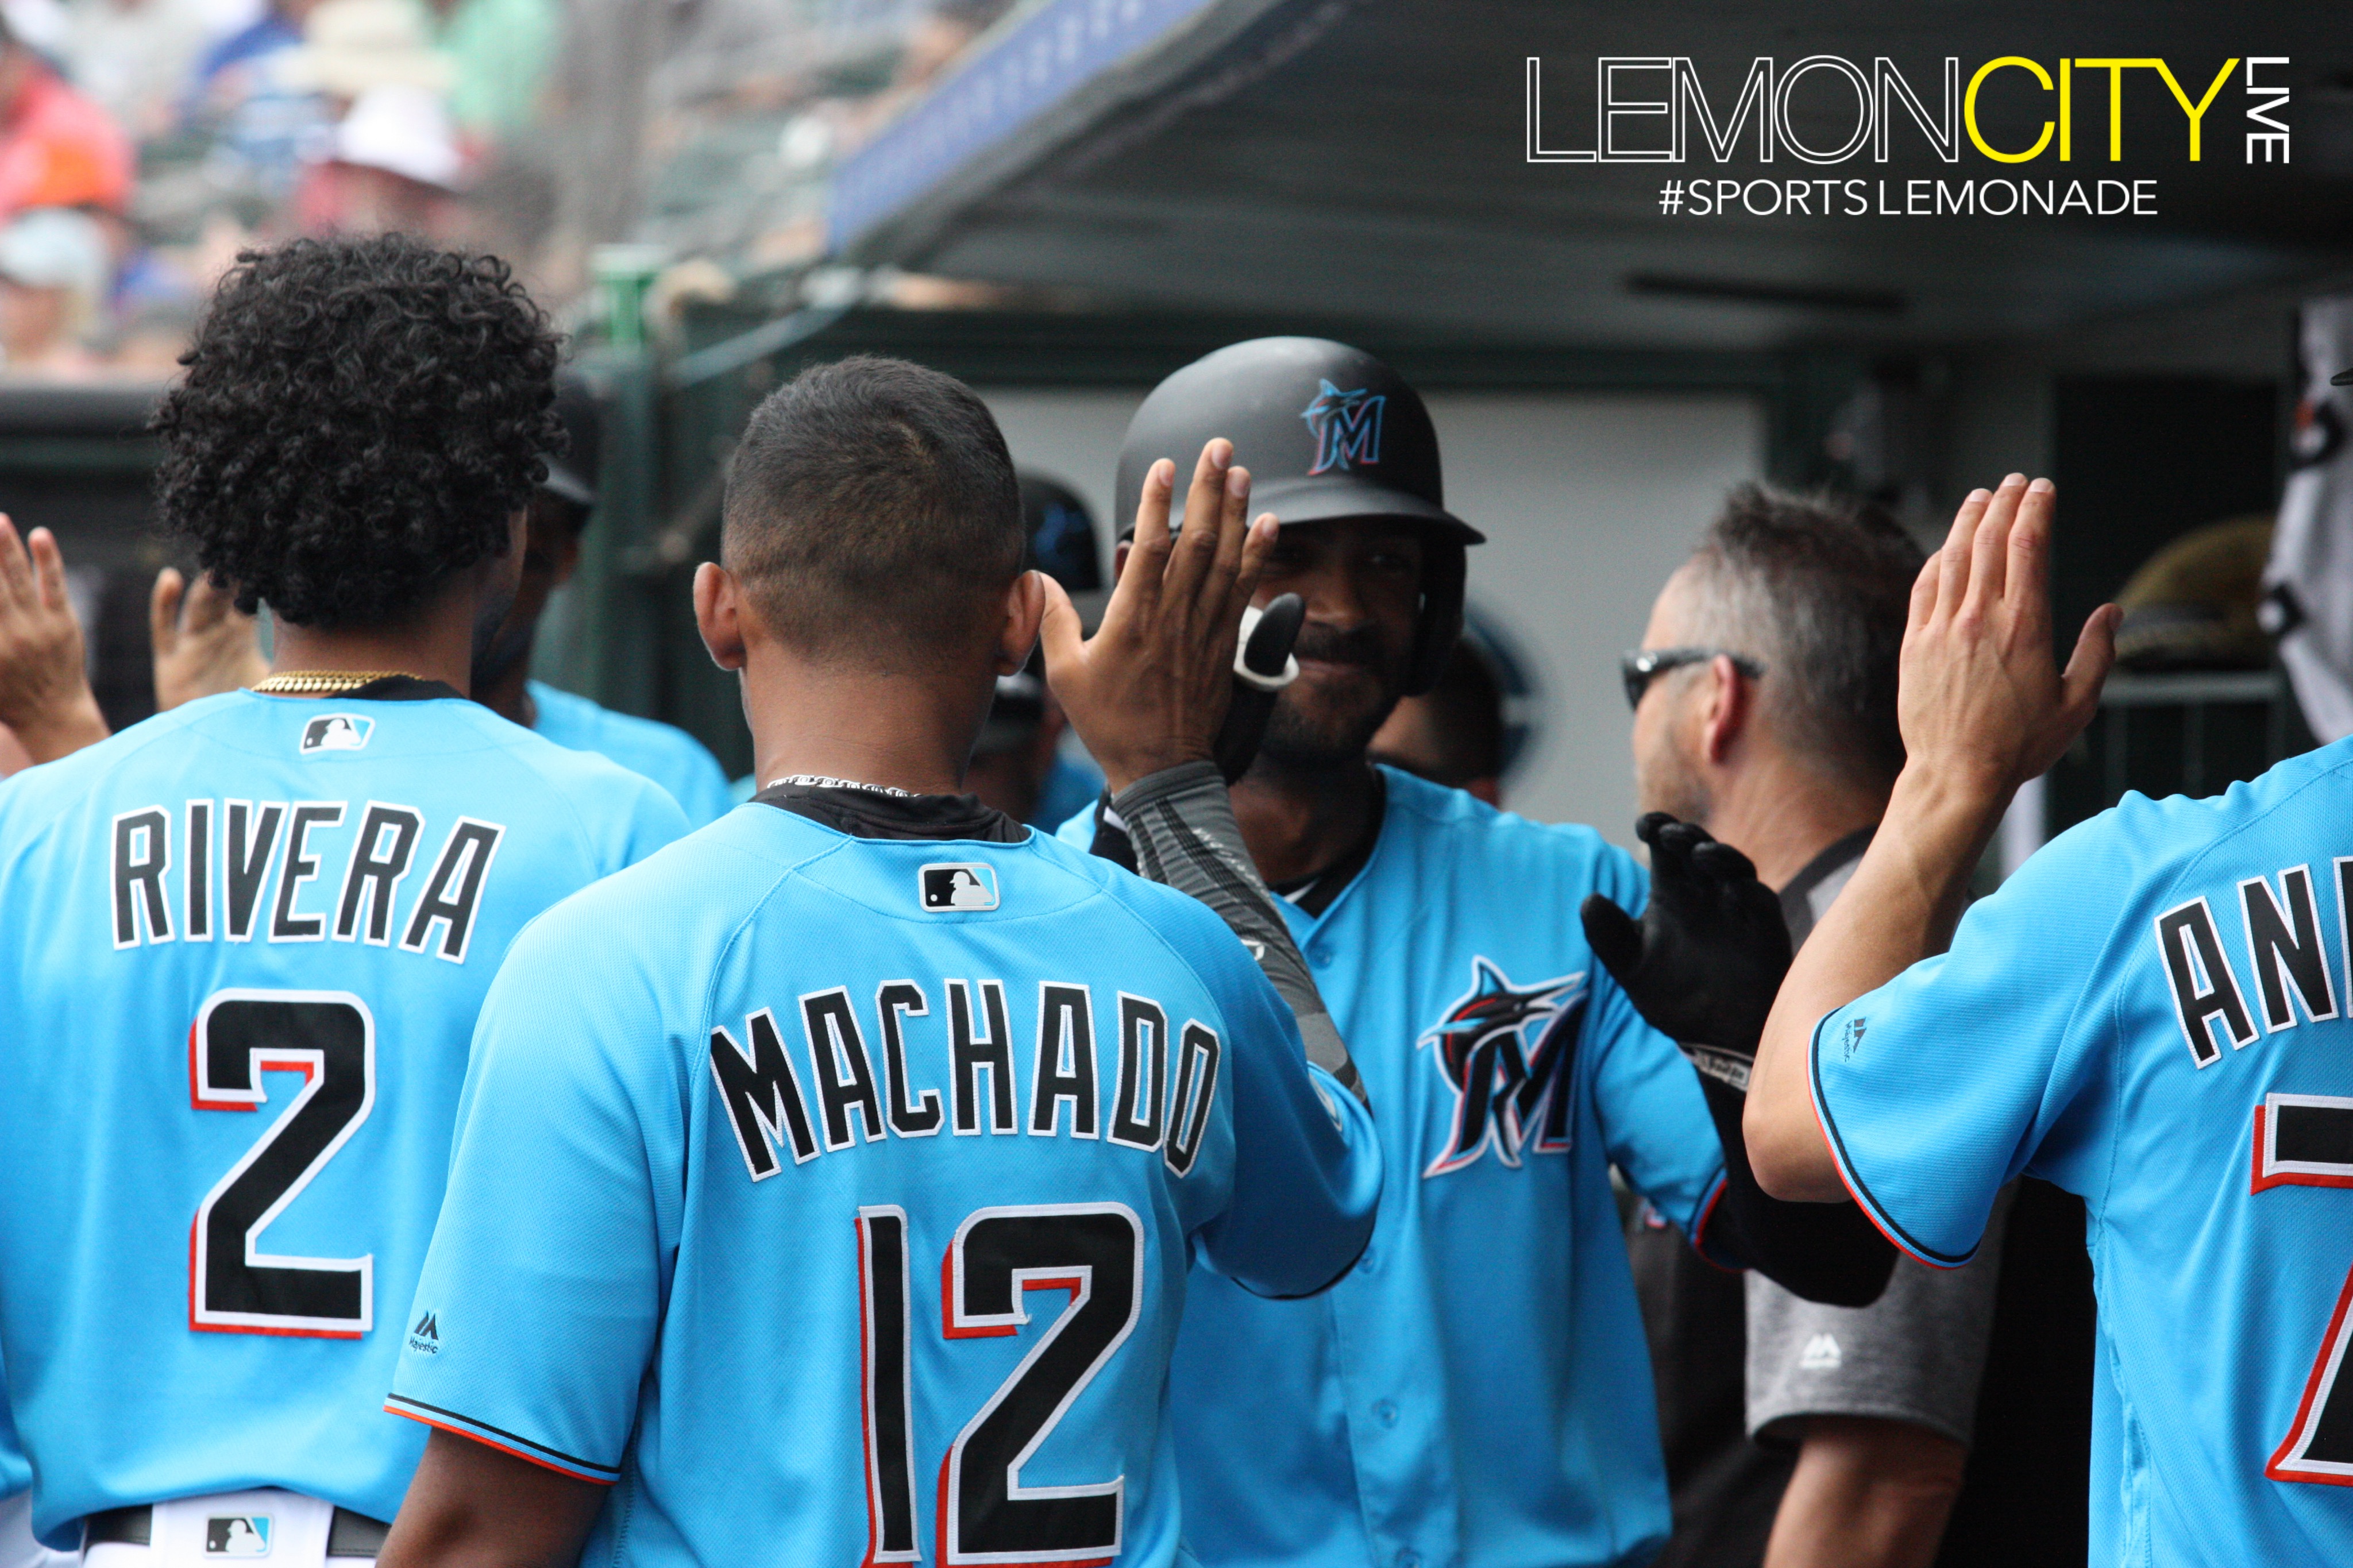 miami marlins teal jersey